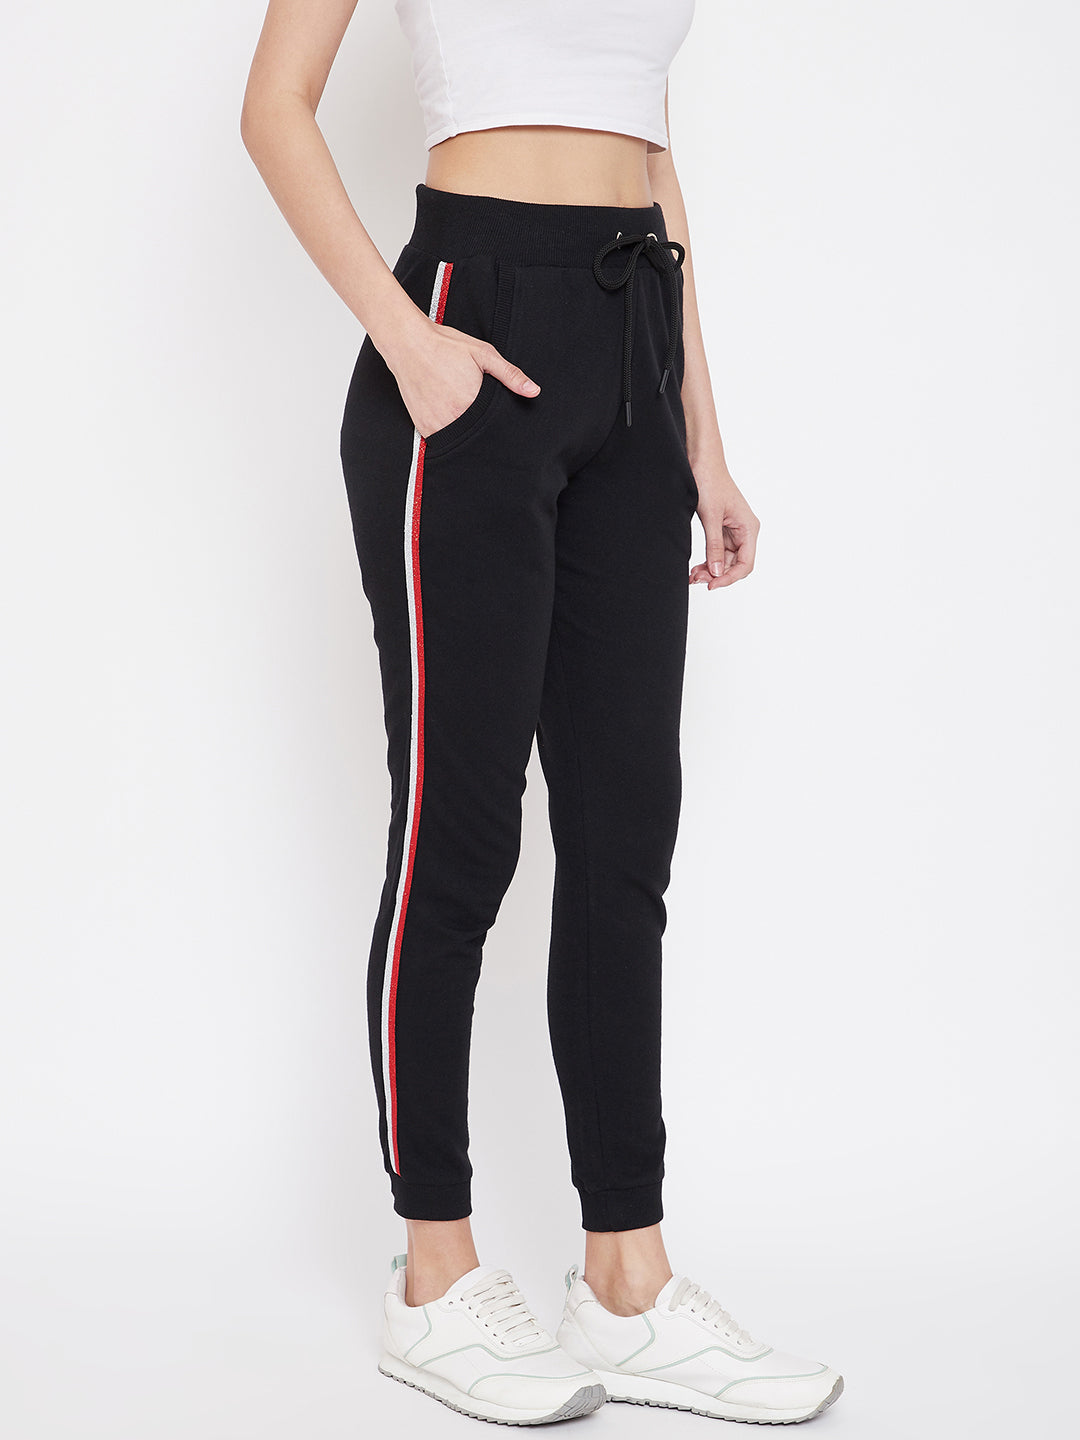 Austin Wood Women's Embroidered Slim Fit Track Pant